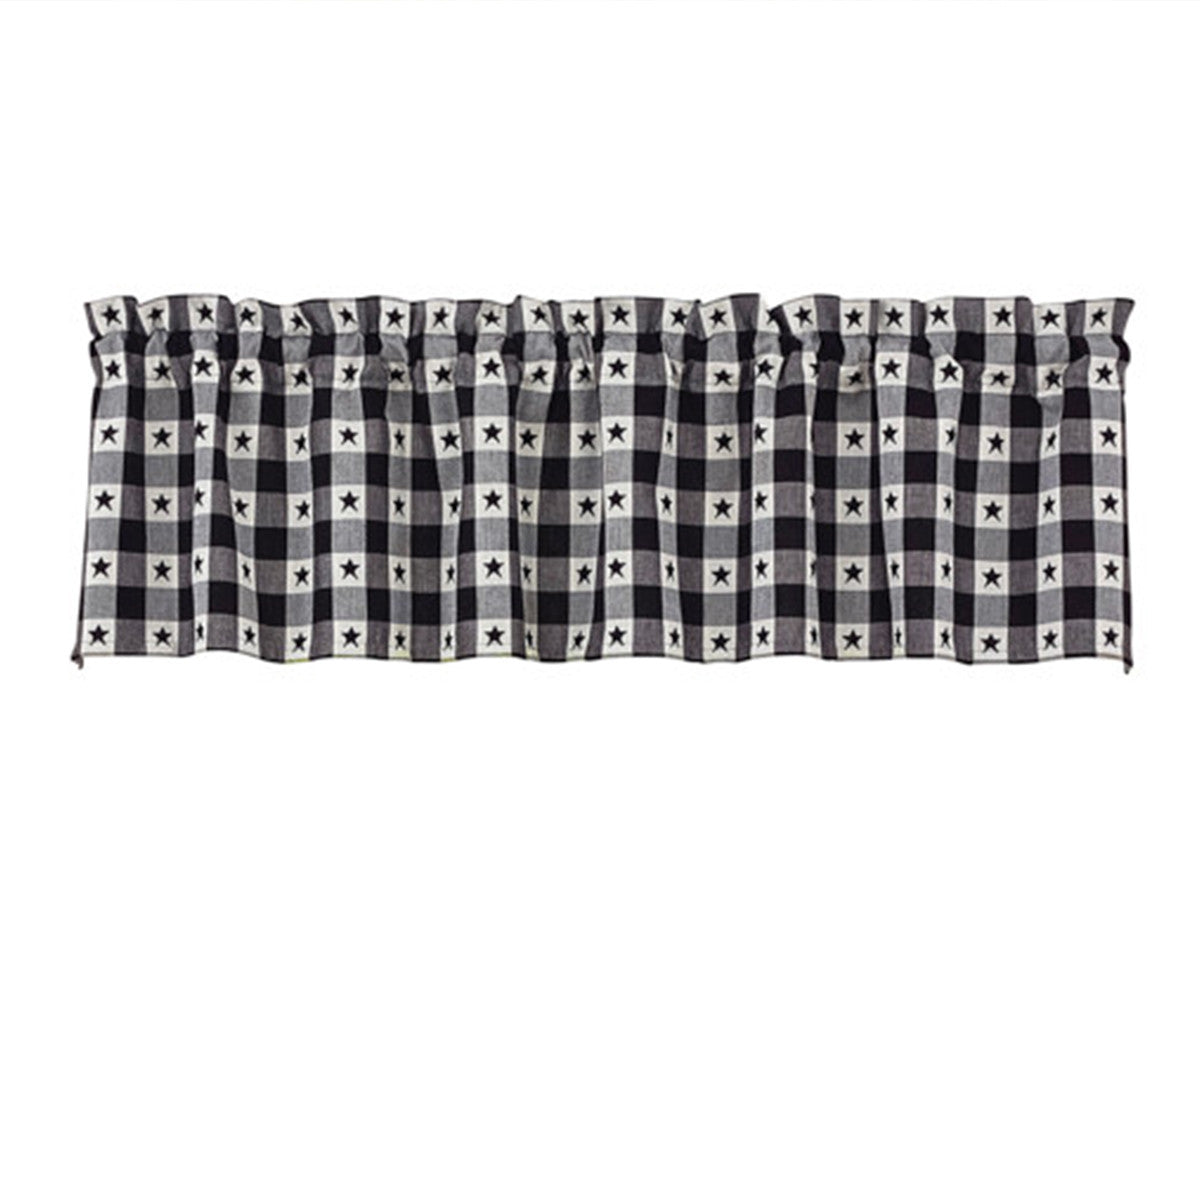 Checkerboard Star Lined  Valance - 60" x 14" Park designs